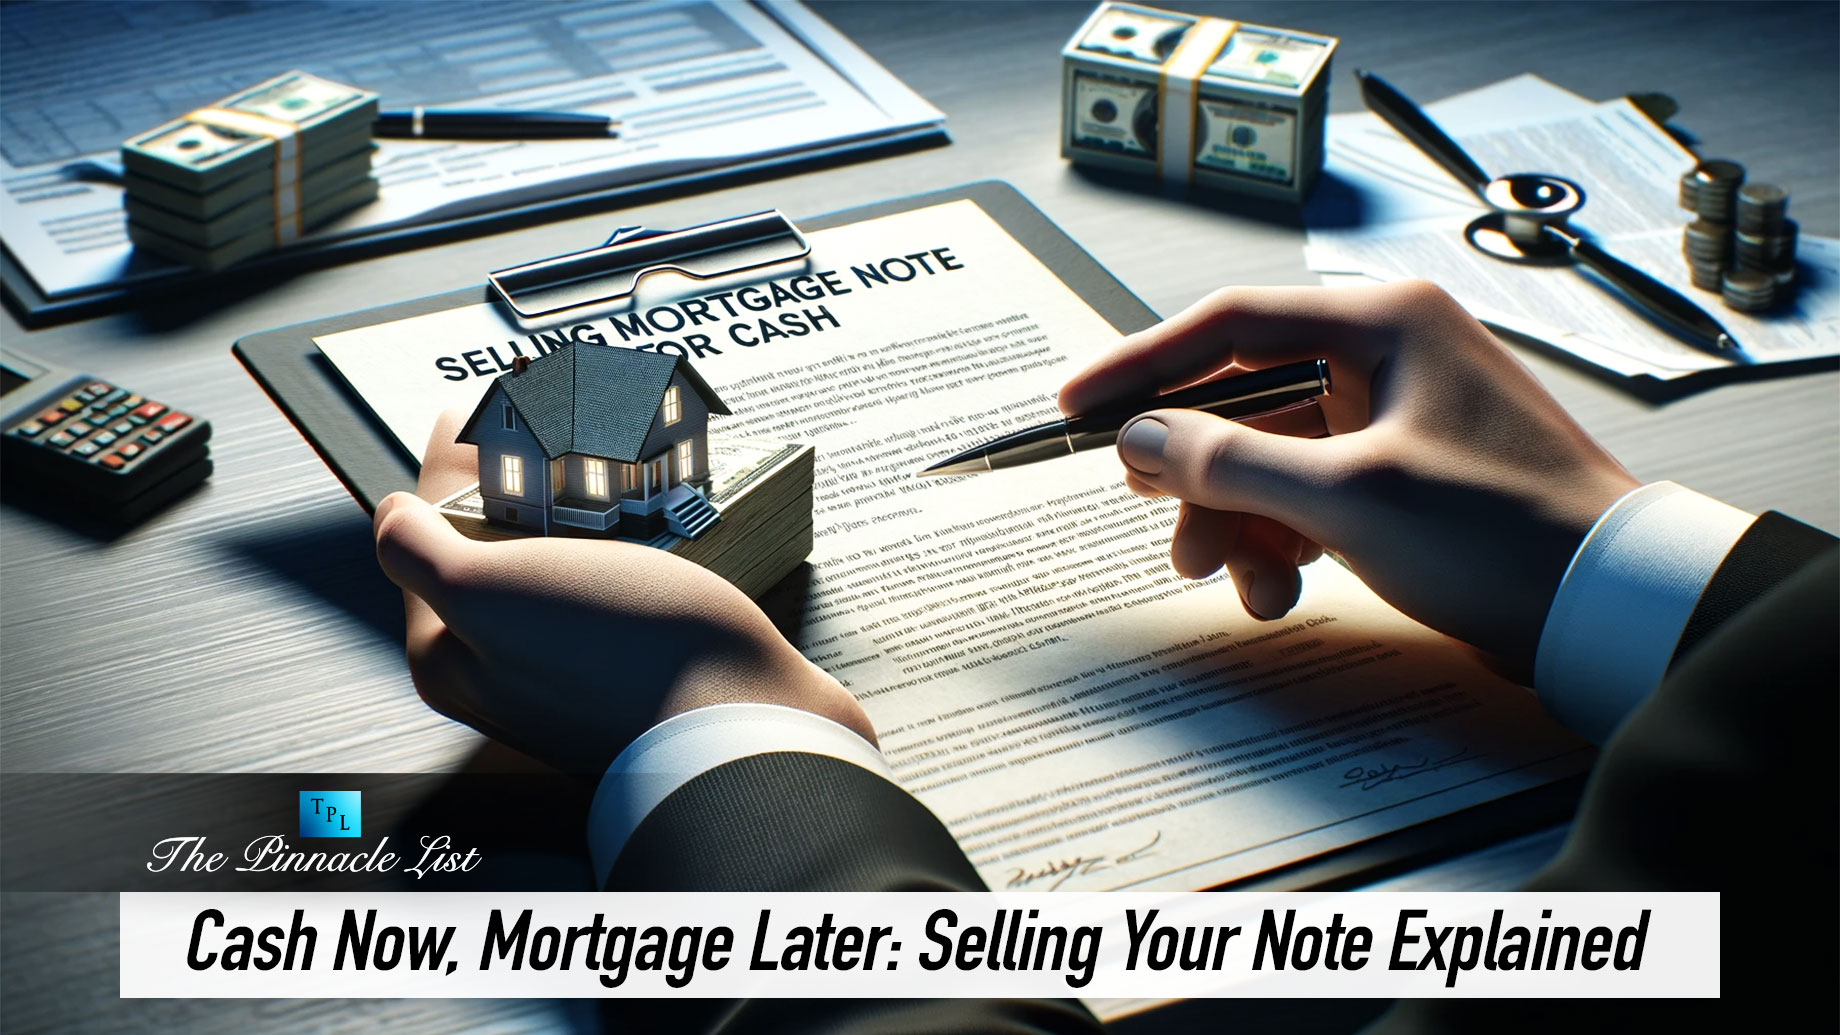 Cash Now, Mortgage Later: Selling Your Note Explained